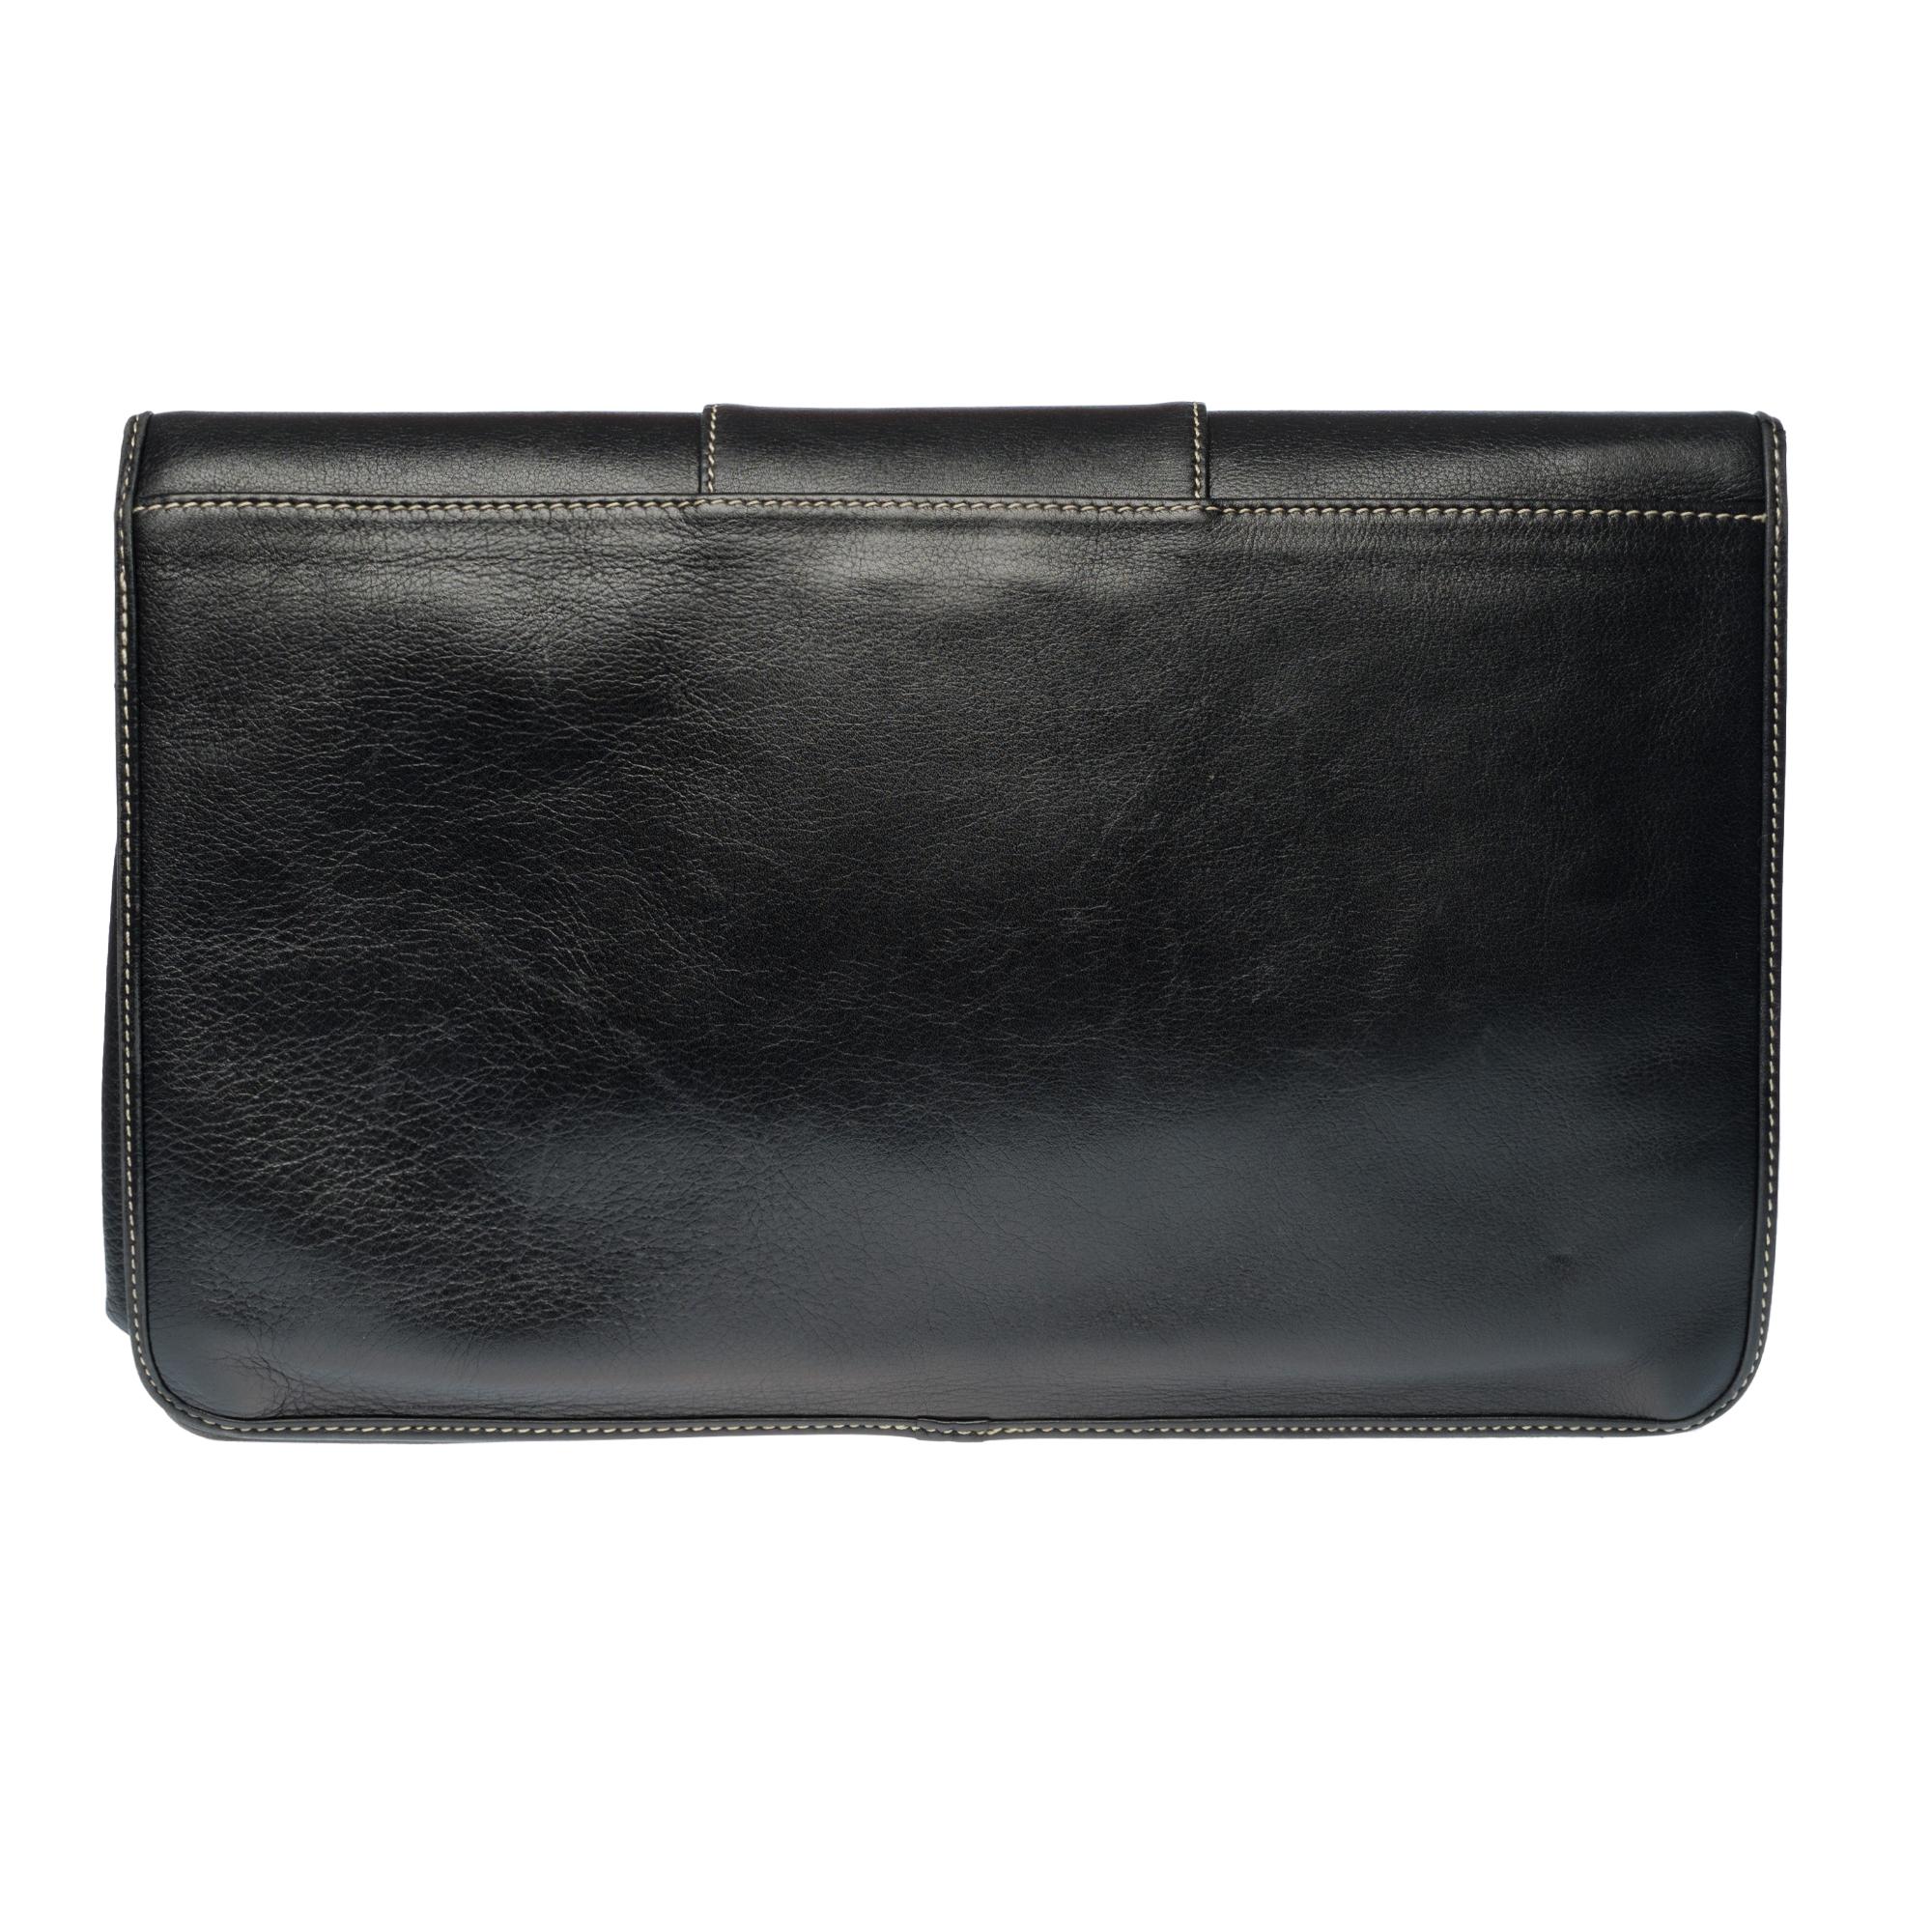 Beautiful Christian Dior Clutch in black leather, white stitching, silver metal hardware.
CD logo flap with push button closure.
Black leather interior, 1 zipped pocket.
Signature: 